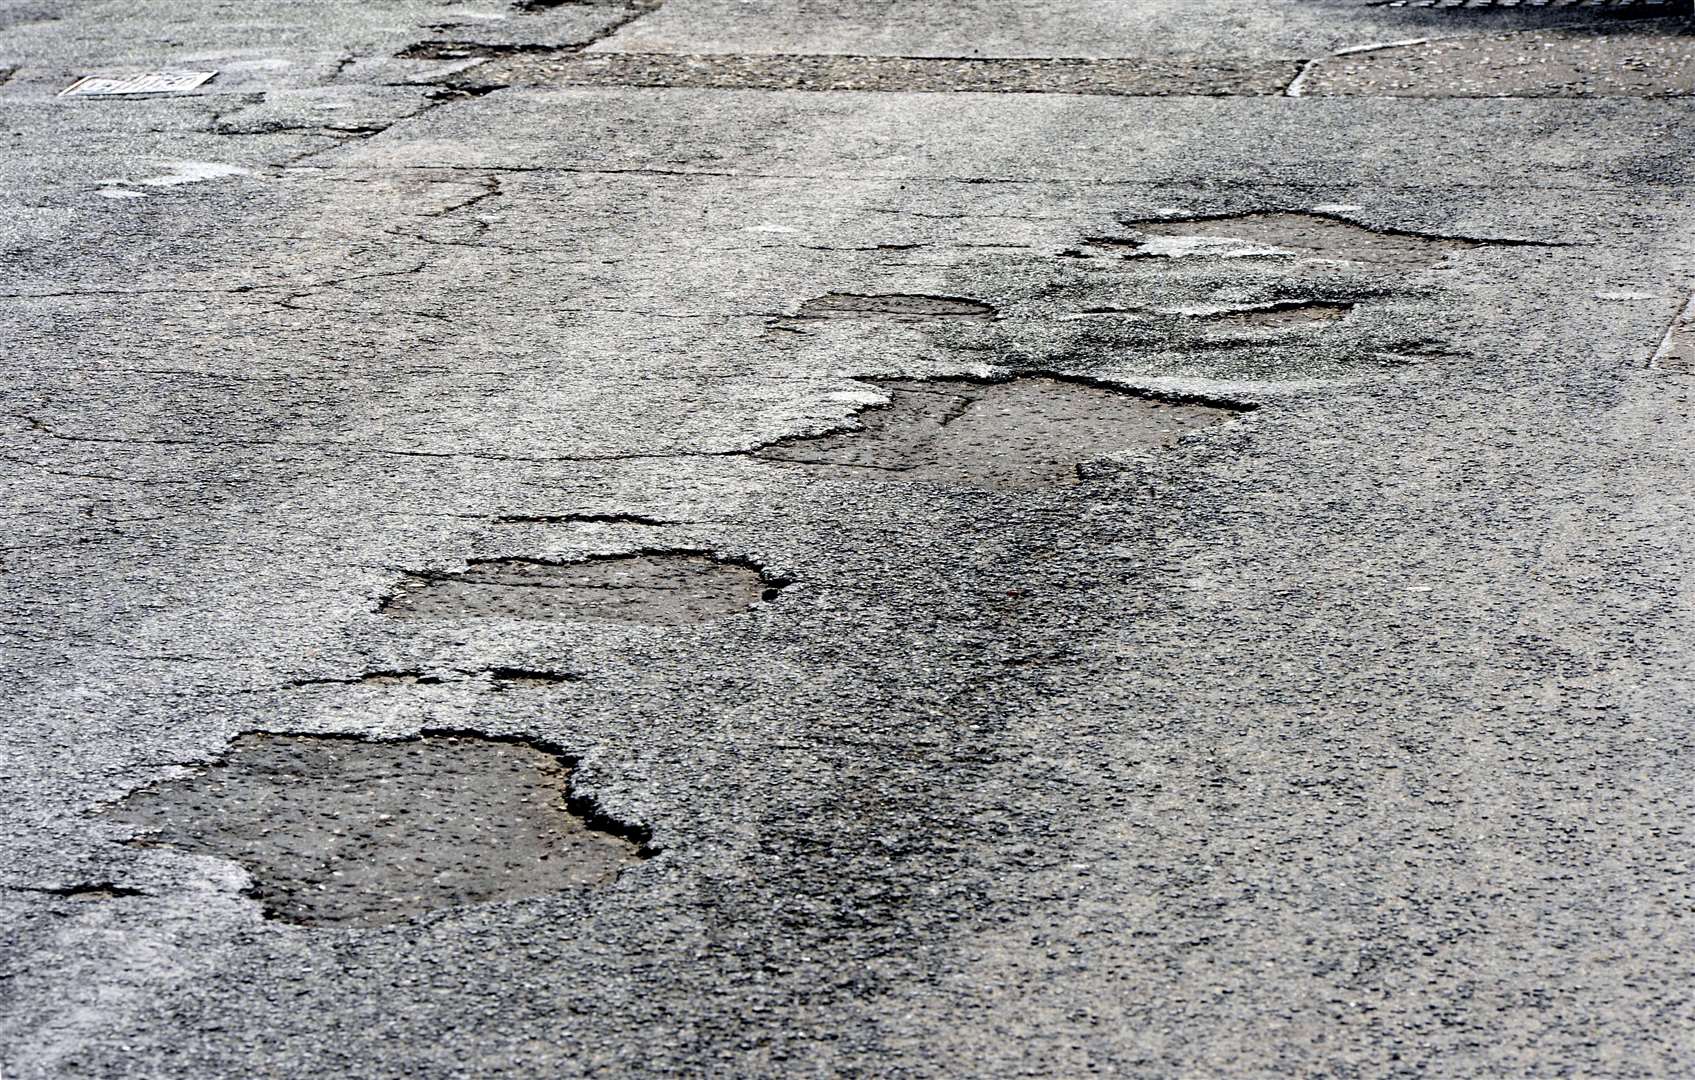 Potholes trouble road users in various parts of the region.